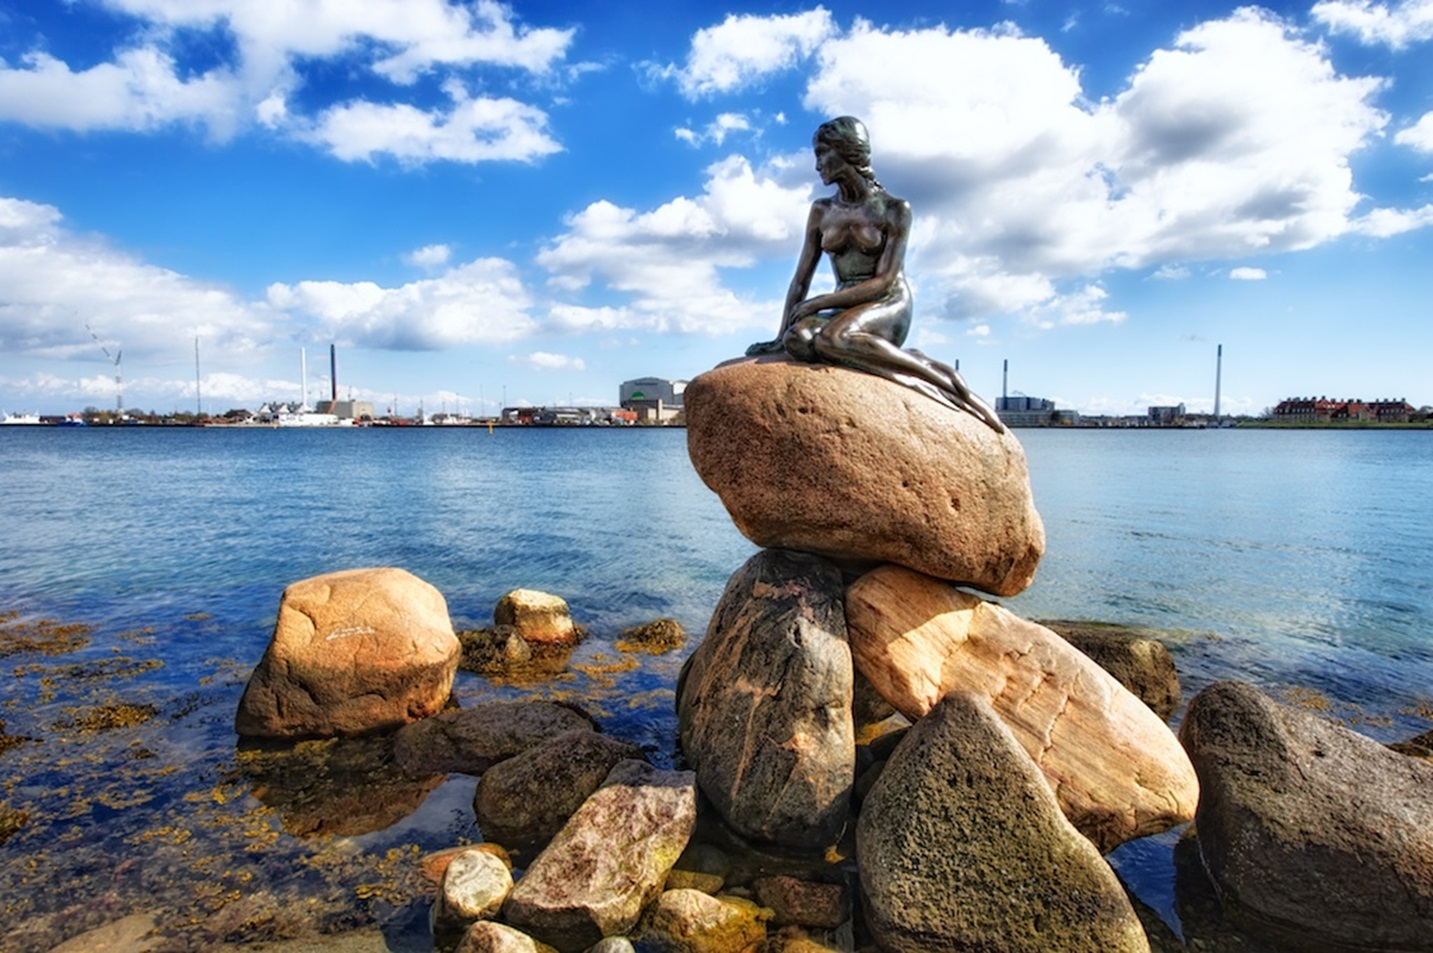 <p><strong>Location: </strong>Copenhagen, Denmark</p>  <p>It seems that the general opinion Copenhagen's<em> The Little Mermaid </em>statue is that it is extremely overrated. The statue is quite small and can be found sitting on a rock along the Langelinie Promenade.</p>